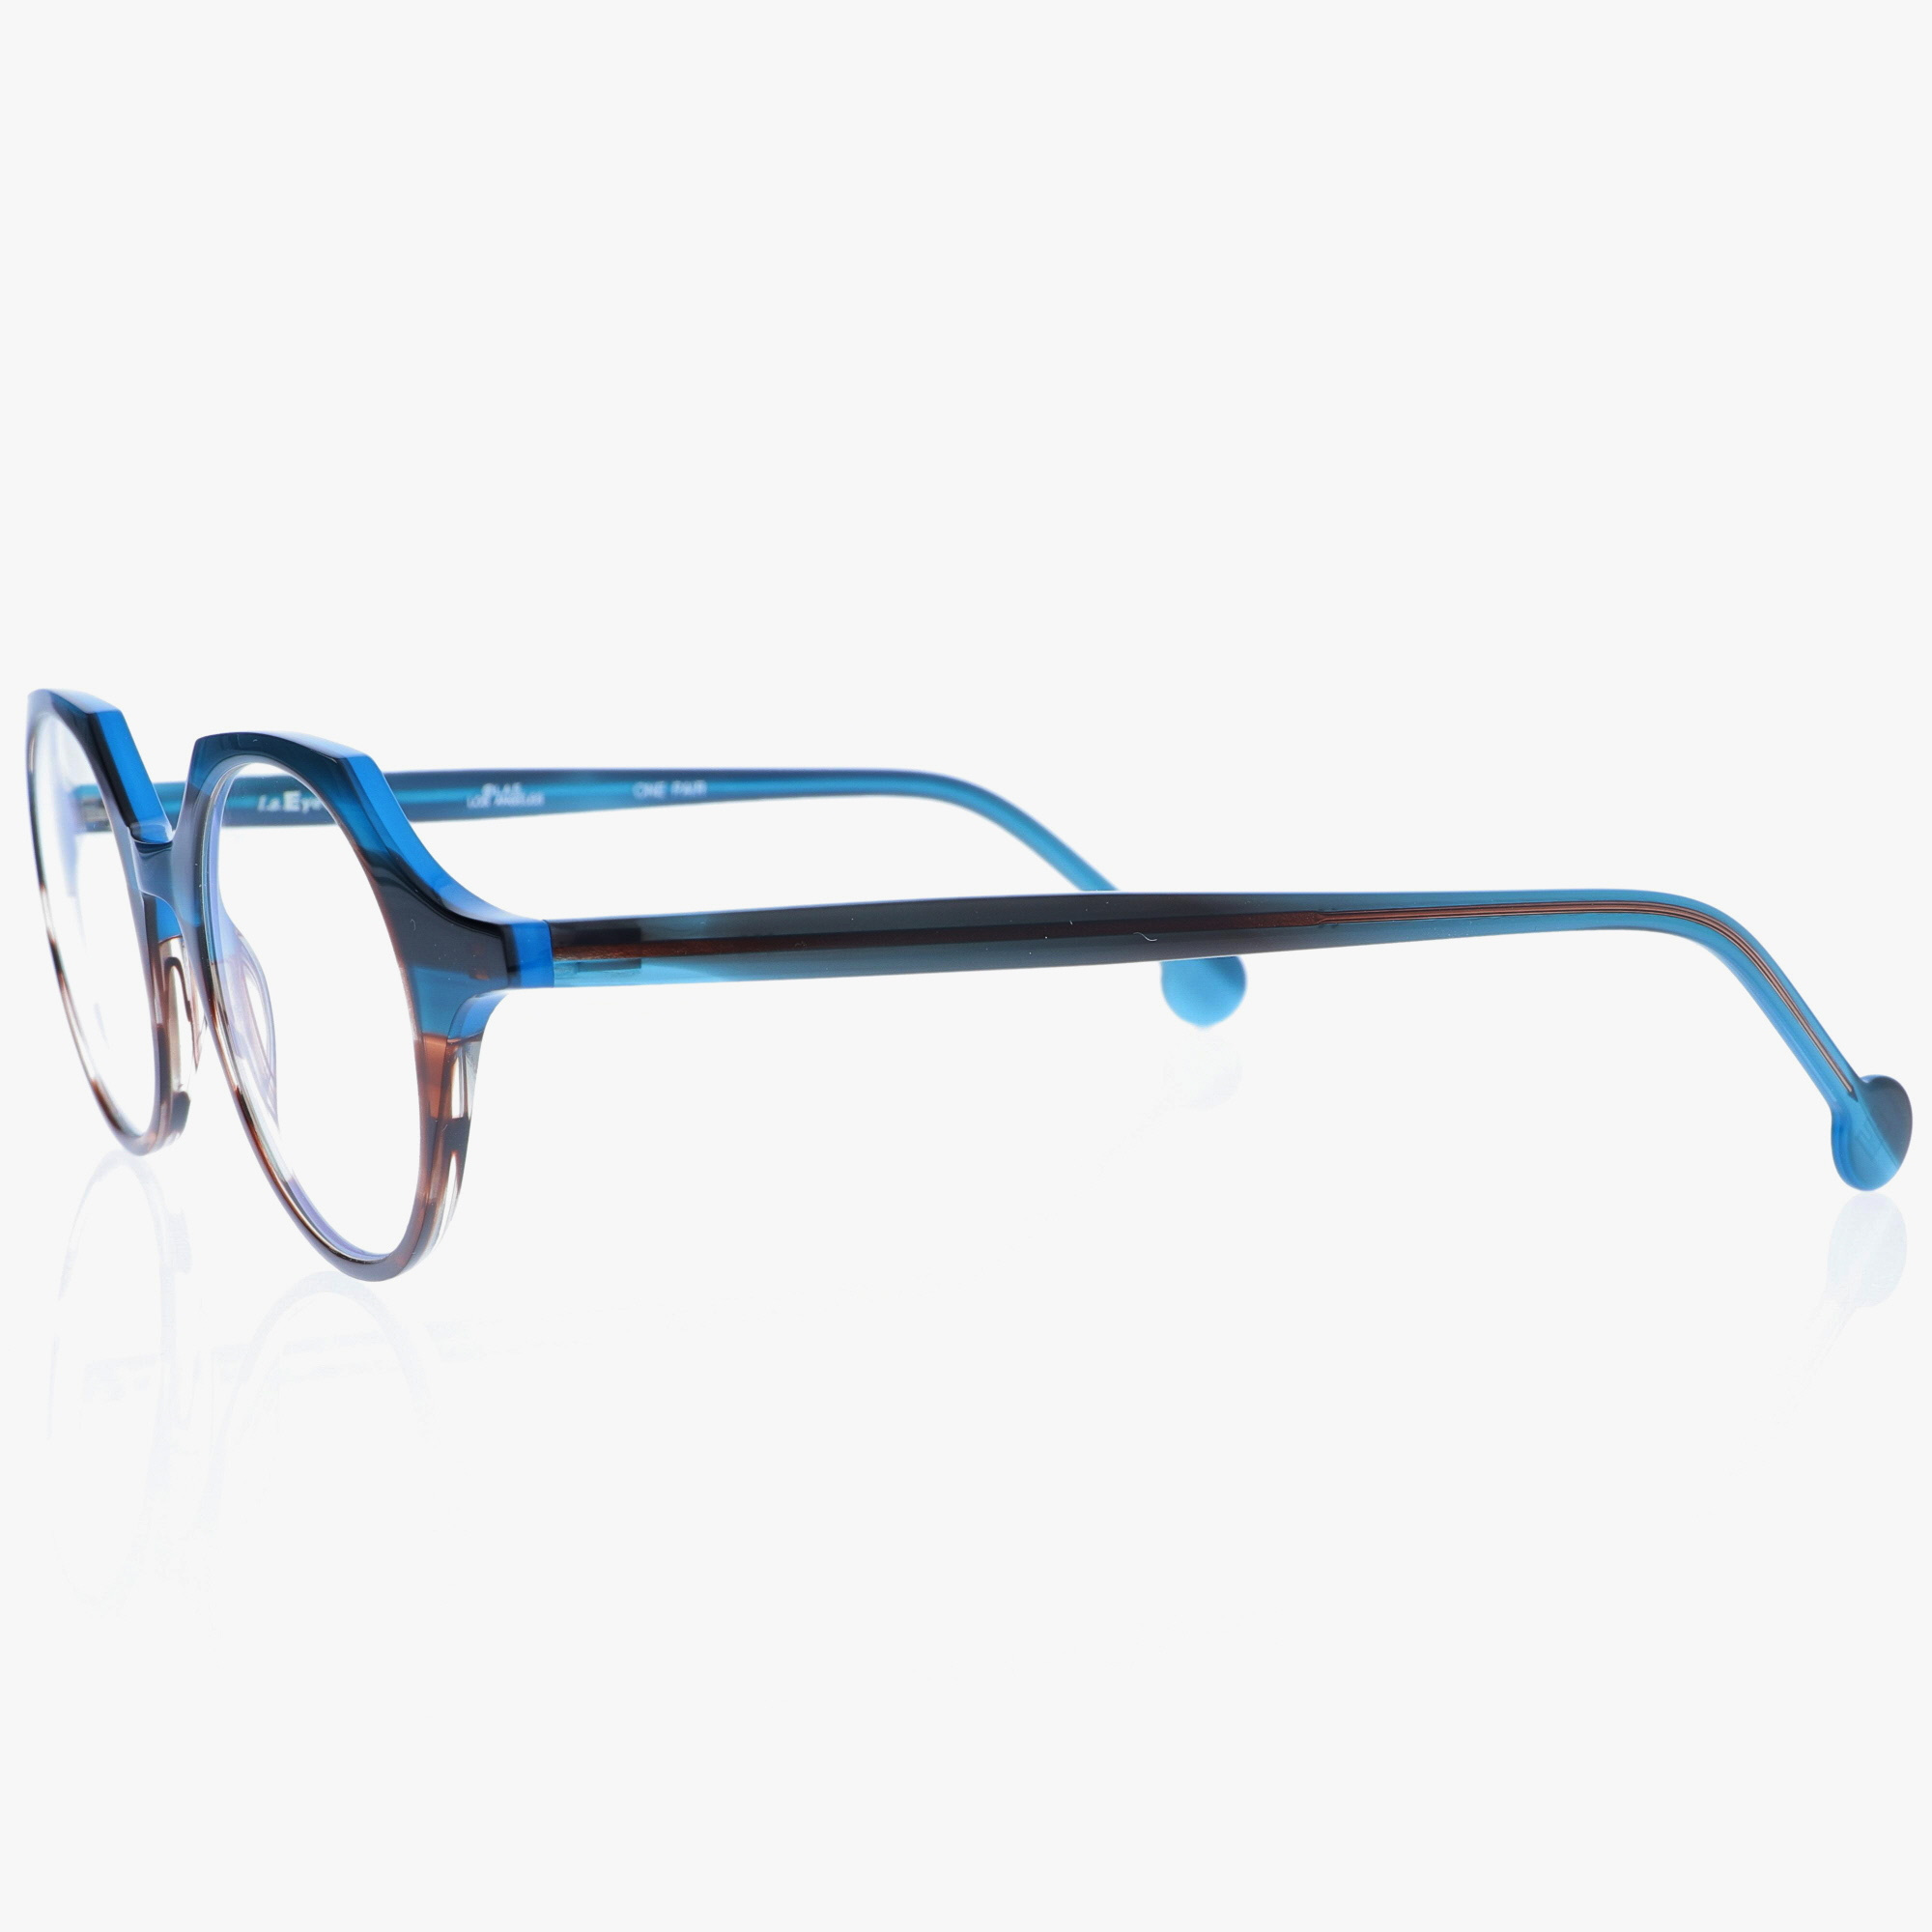 L.A.EYEWORKS / QUILL / WHALE TORTOISE